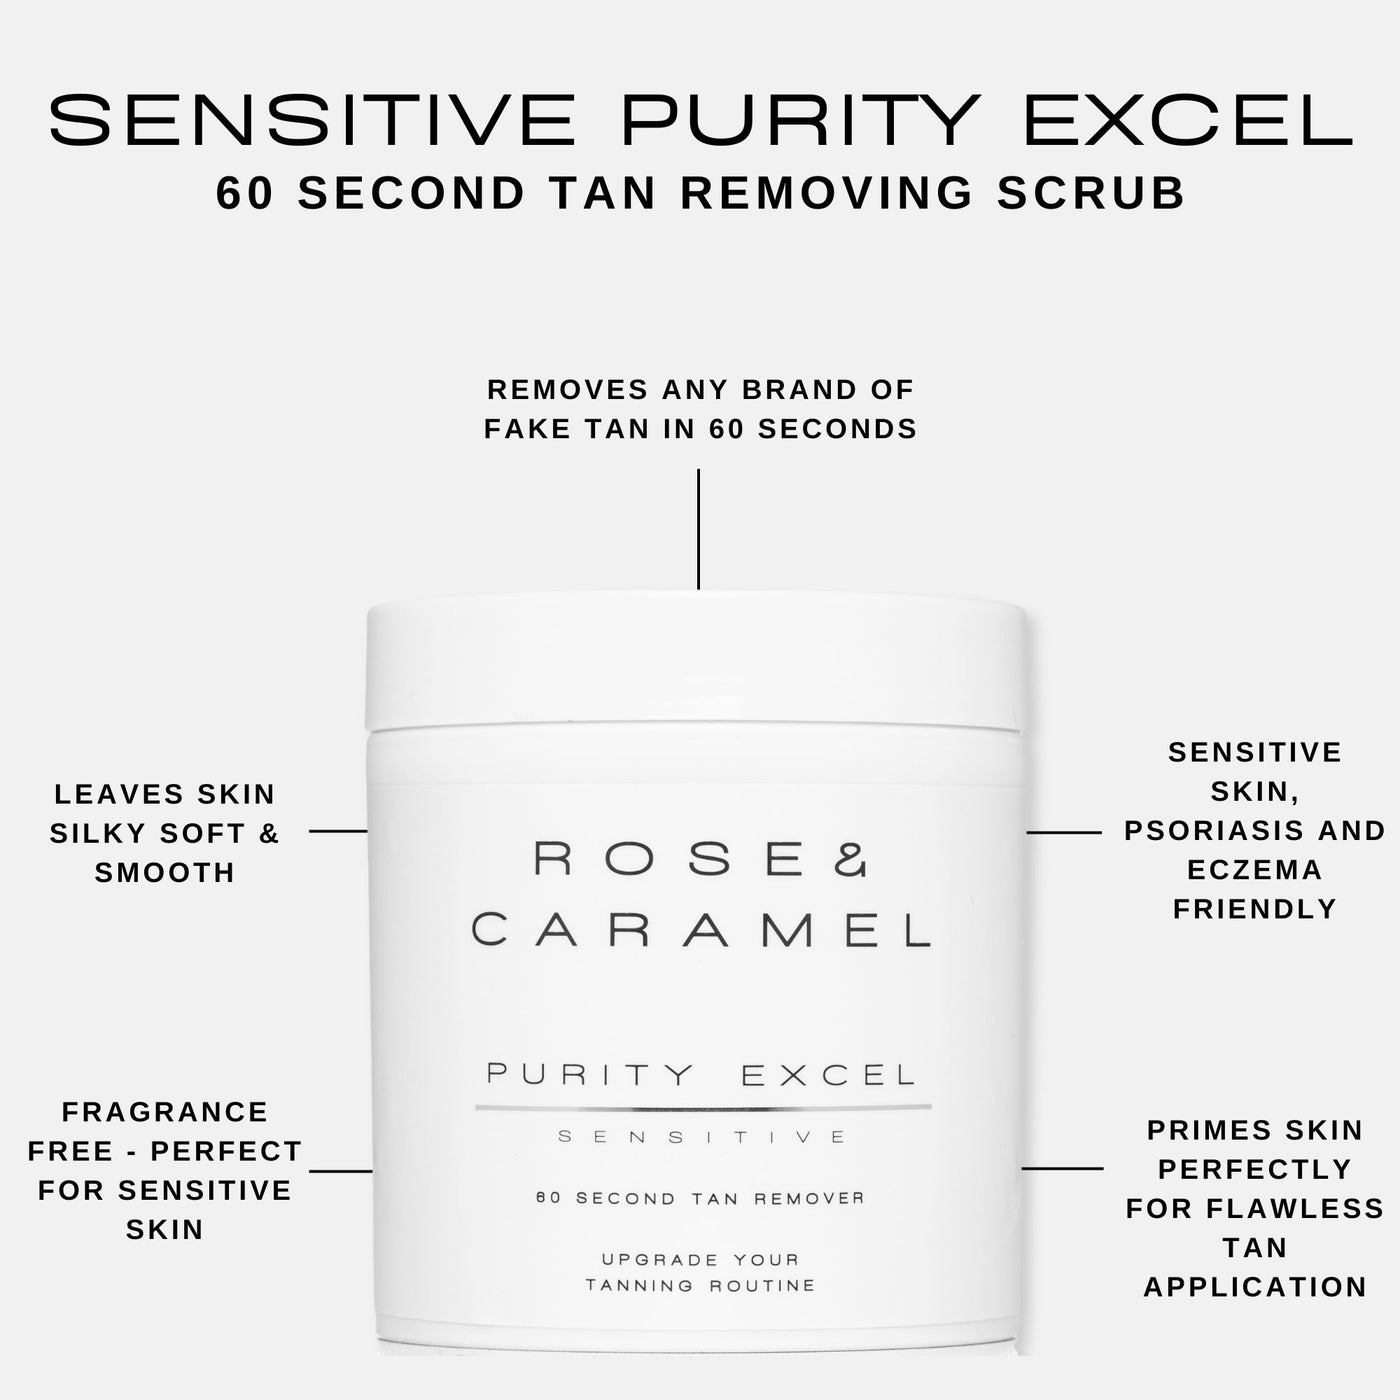 BOX OF SENSITIVE EDITION - PURITY EXCEL 60 SECOND TAN REMOVER 440ML